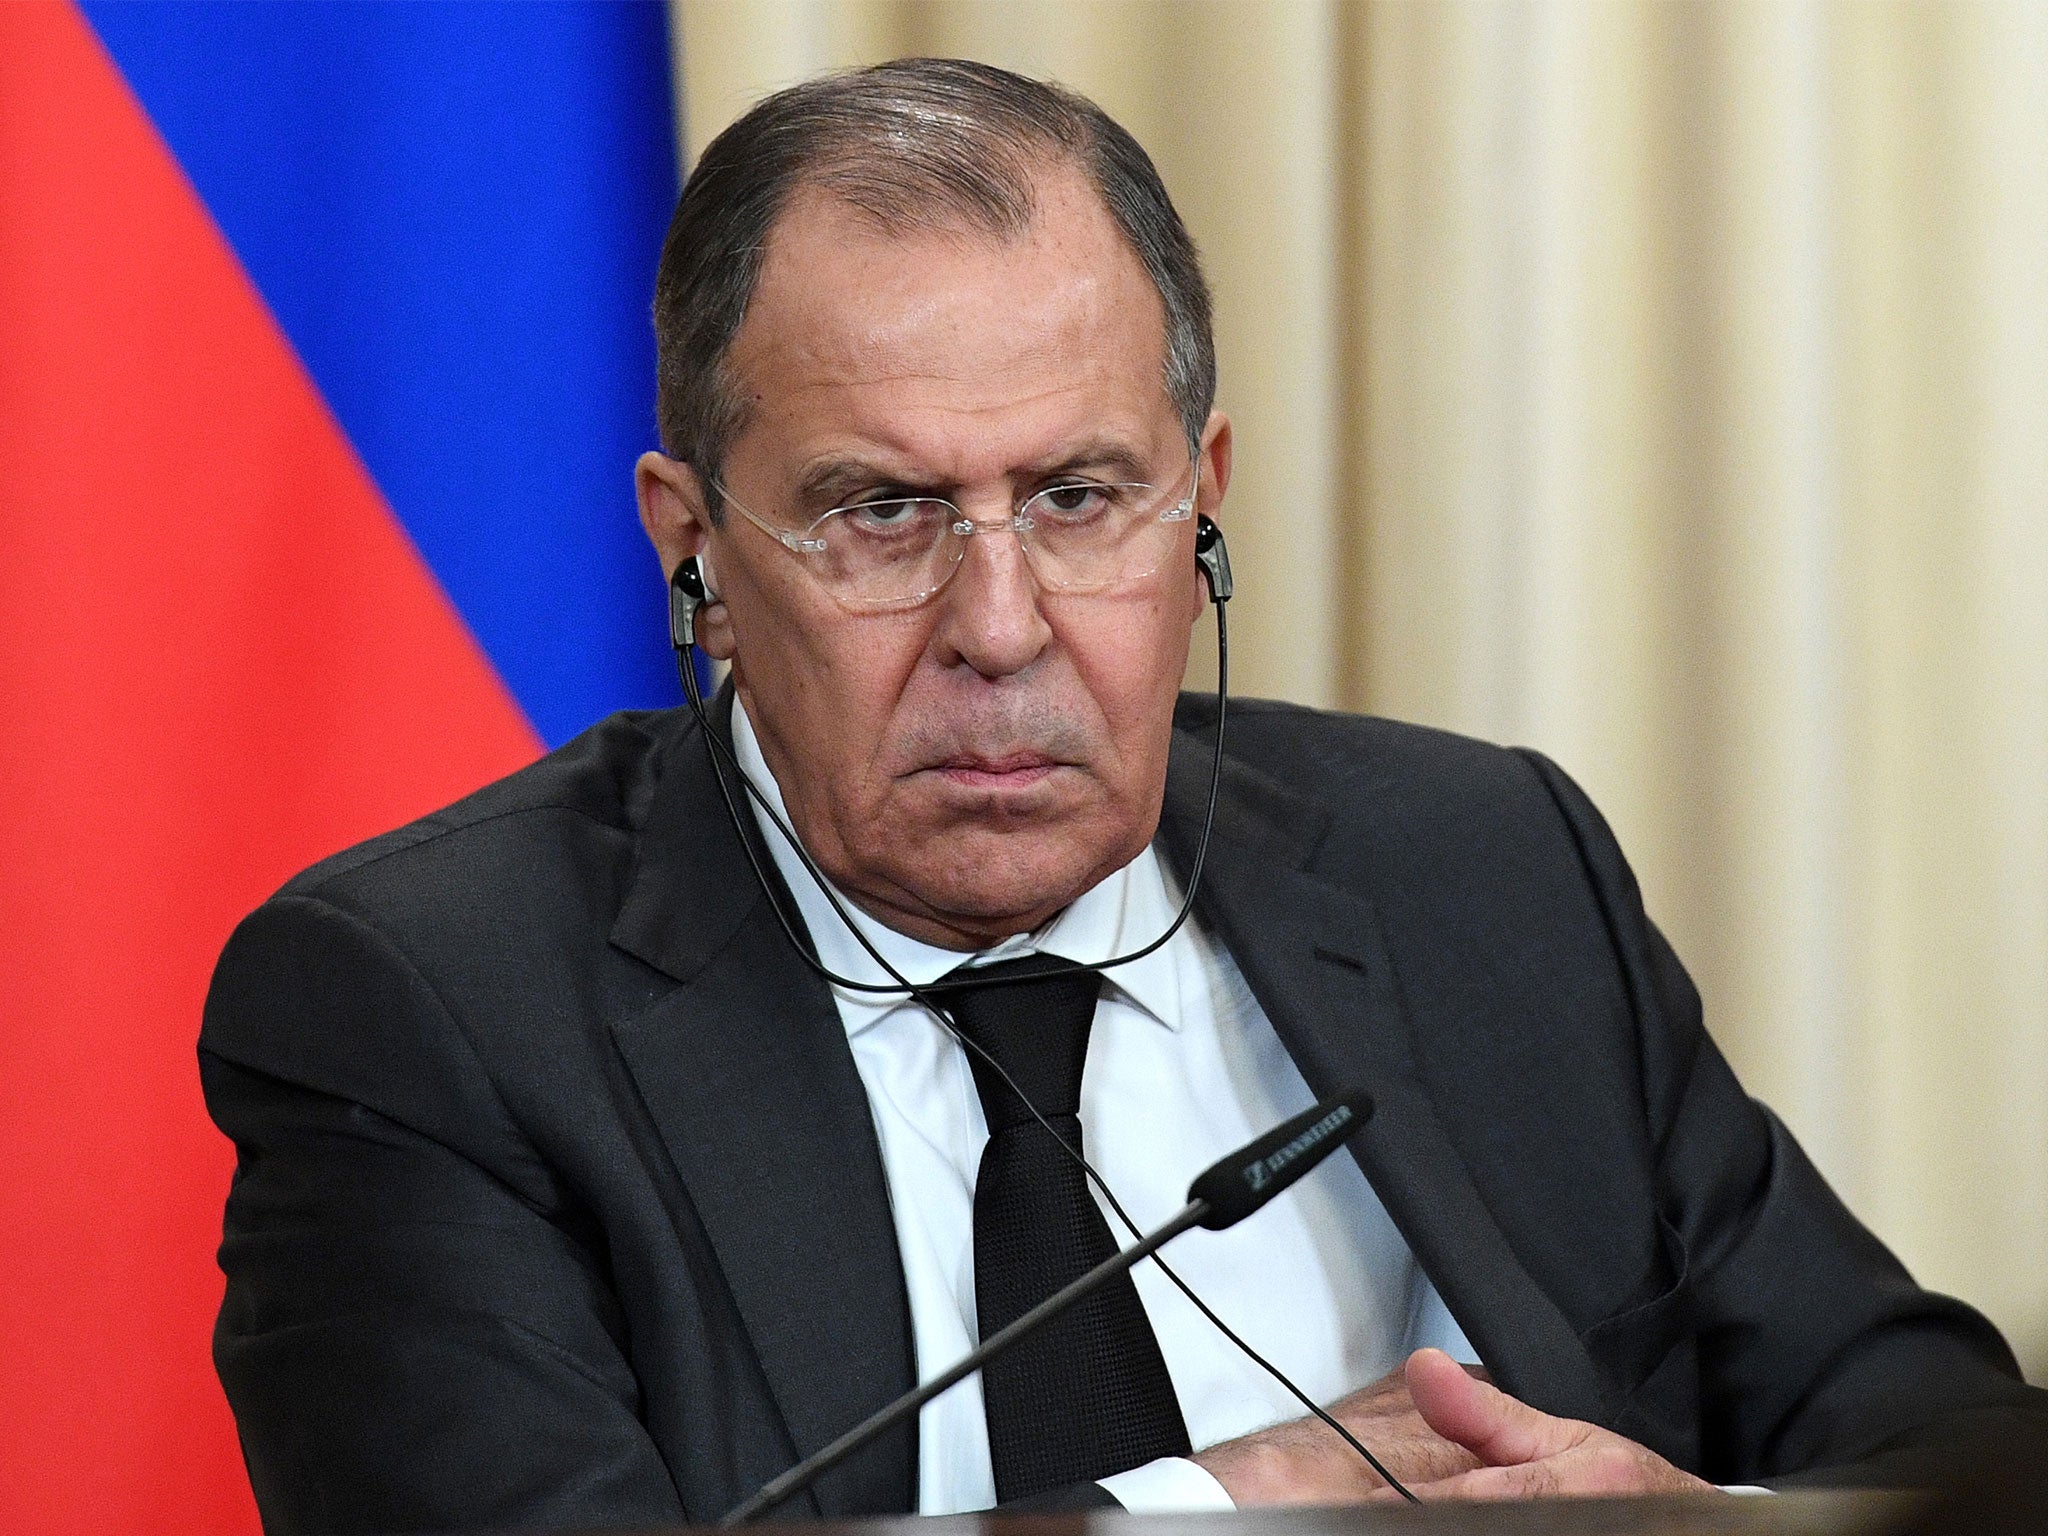 Russian Foreign Minister Sergei Lavrov made the comments during a news conference in Moscow